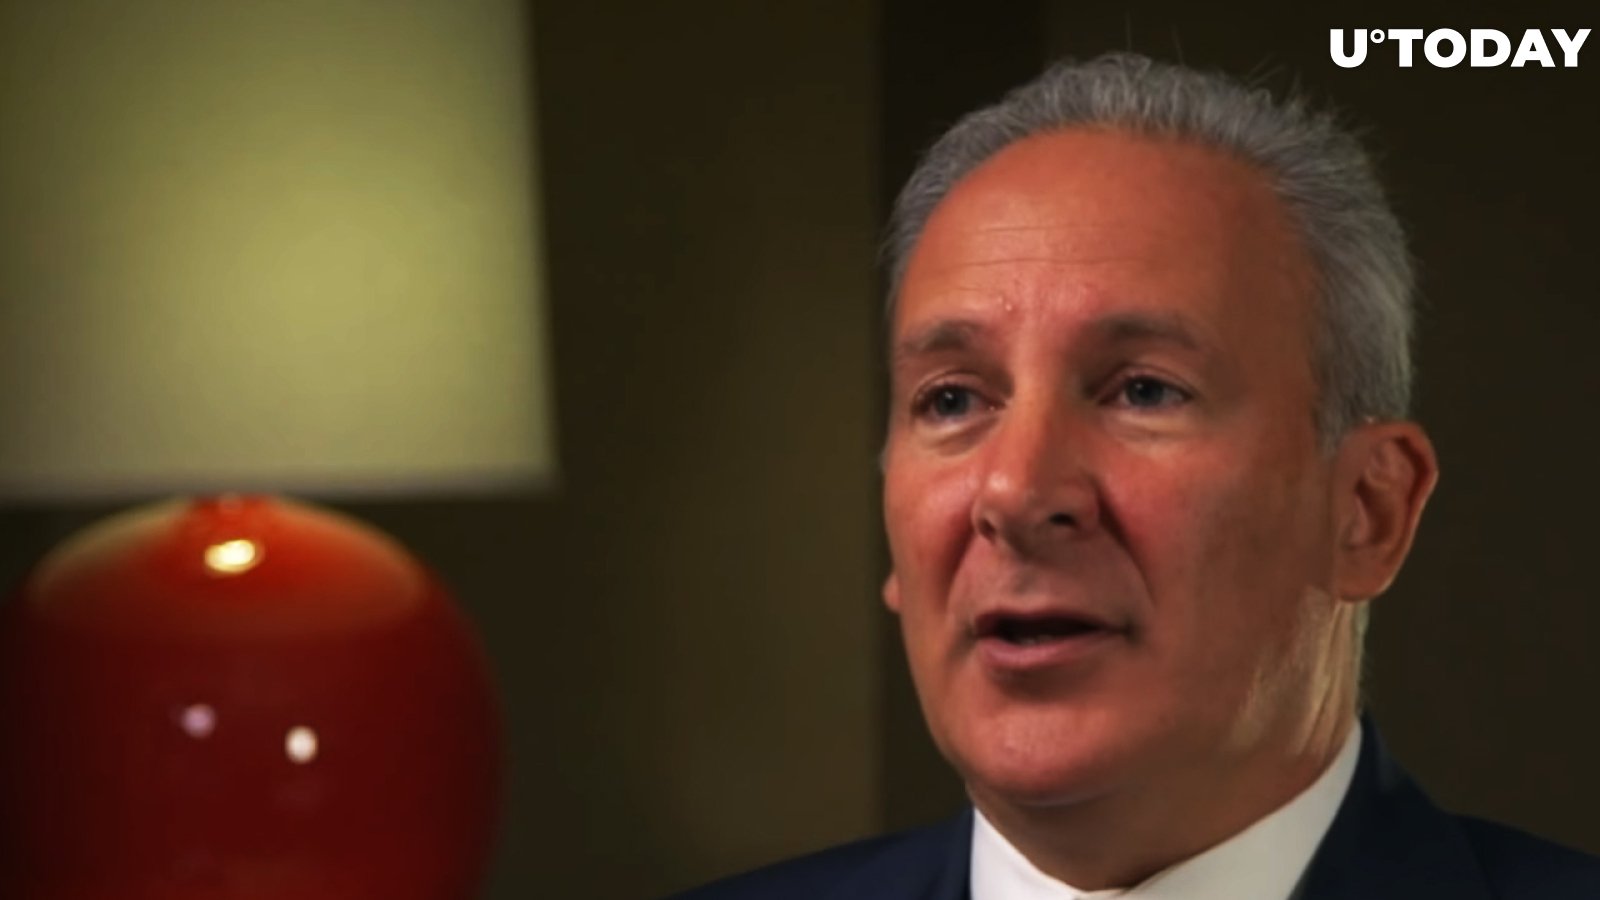 BTC Hater Peter Schiff Surprised Bitcoin "Holding Up This Well"